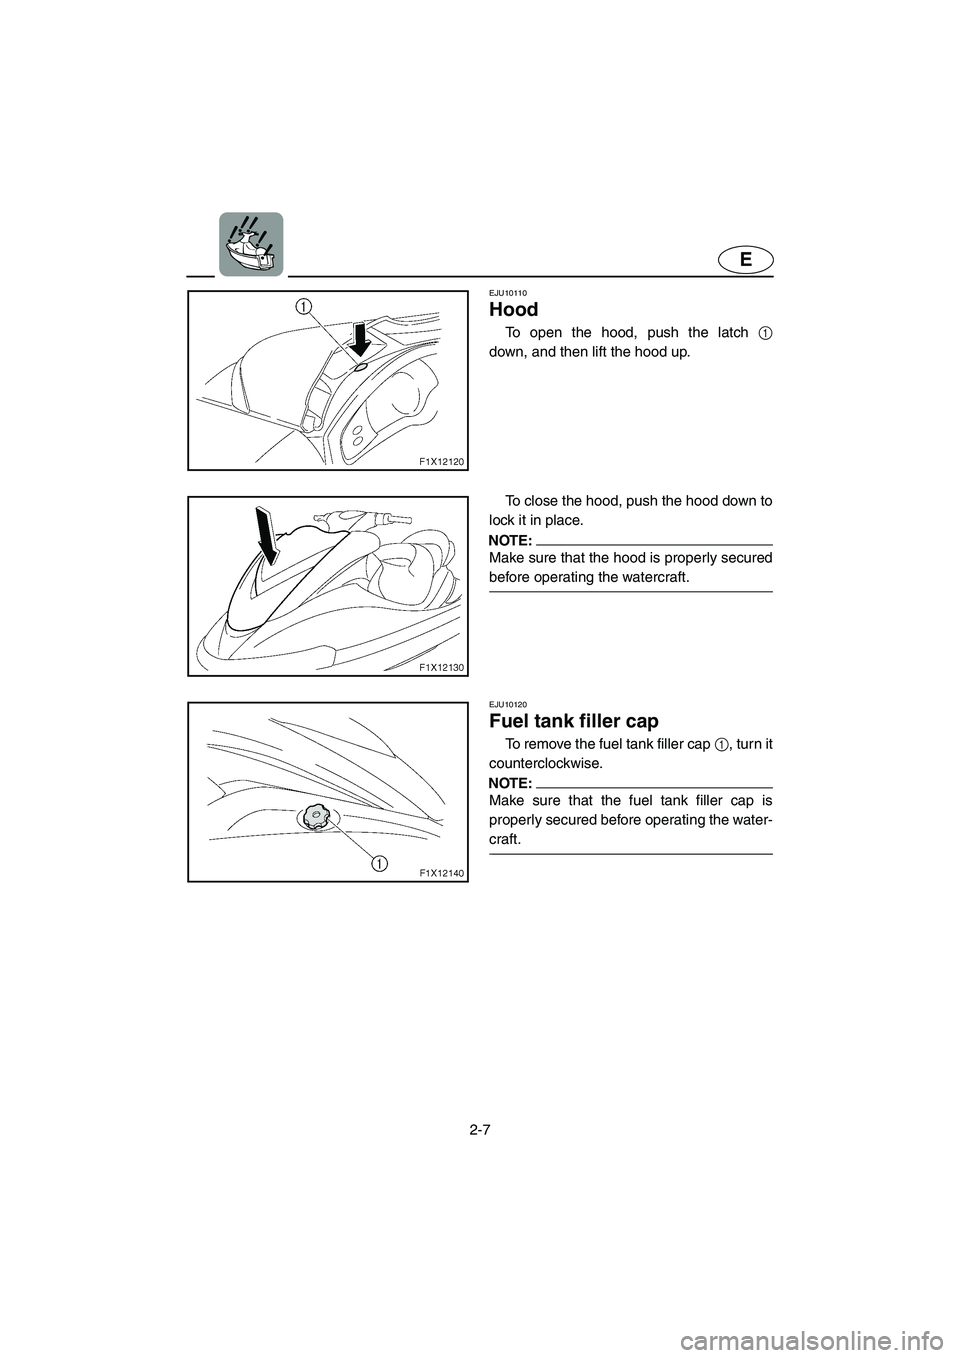 YAMAHA FX HO 2006  Owners Manual 2-7
E
EJU10110 
Hood  
To open the hood, push the latch 1
down, and then lift the hood up. 
To close the hood, push the hood down to
lock it in place. 
NOTE:@ Make sure that the hood is properly secur